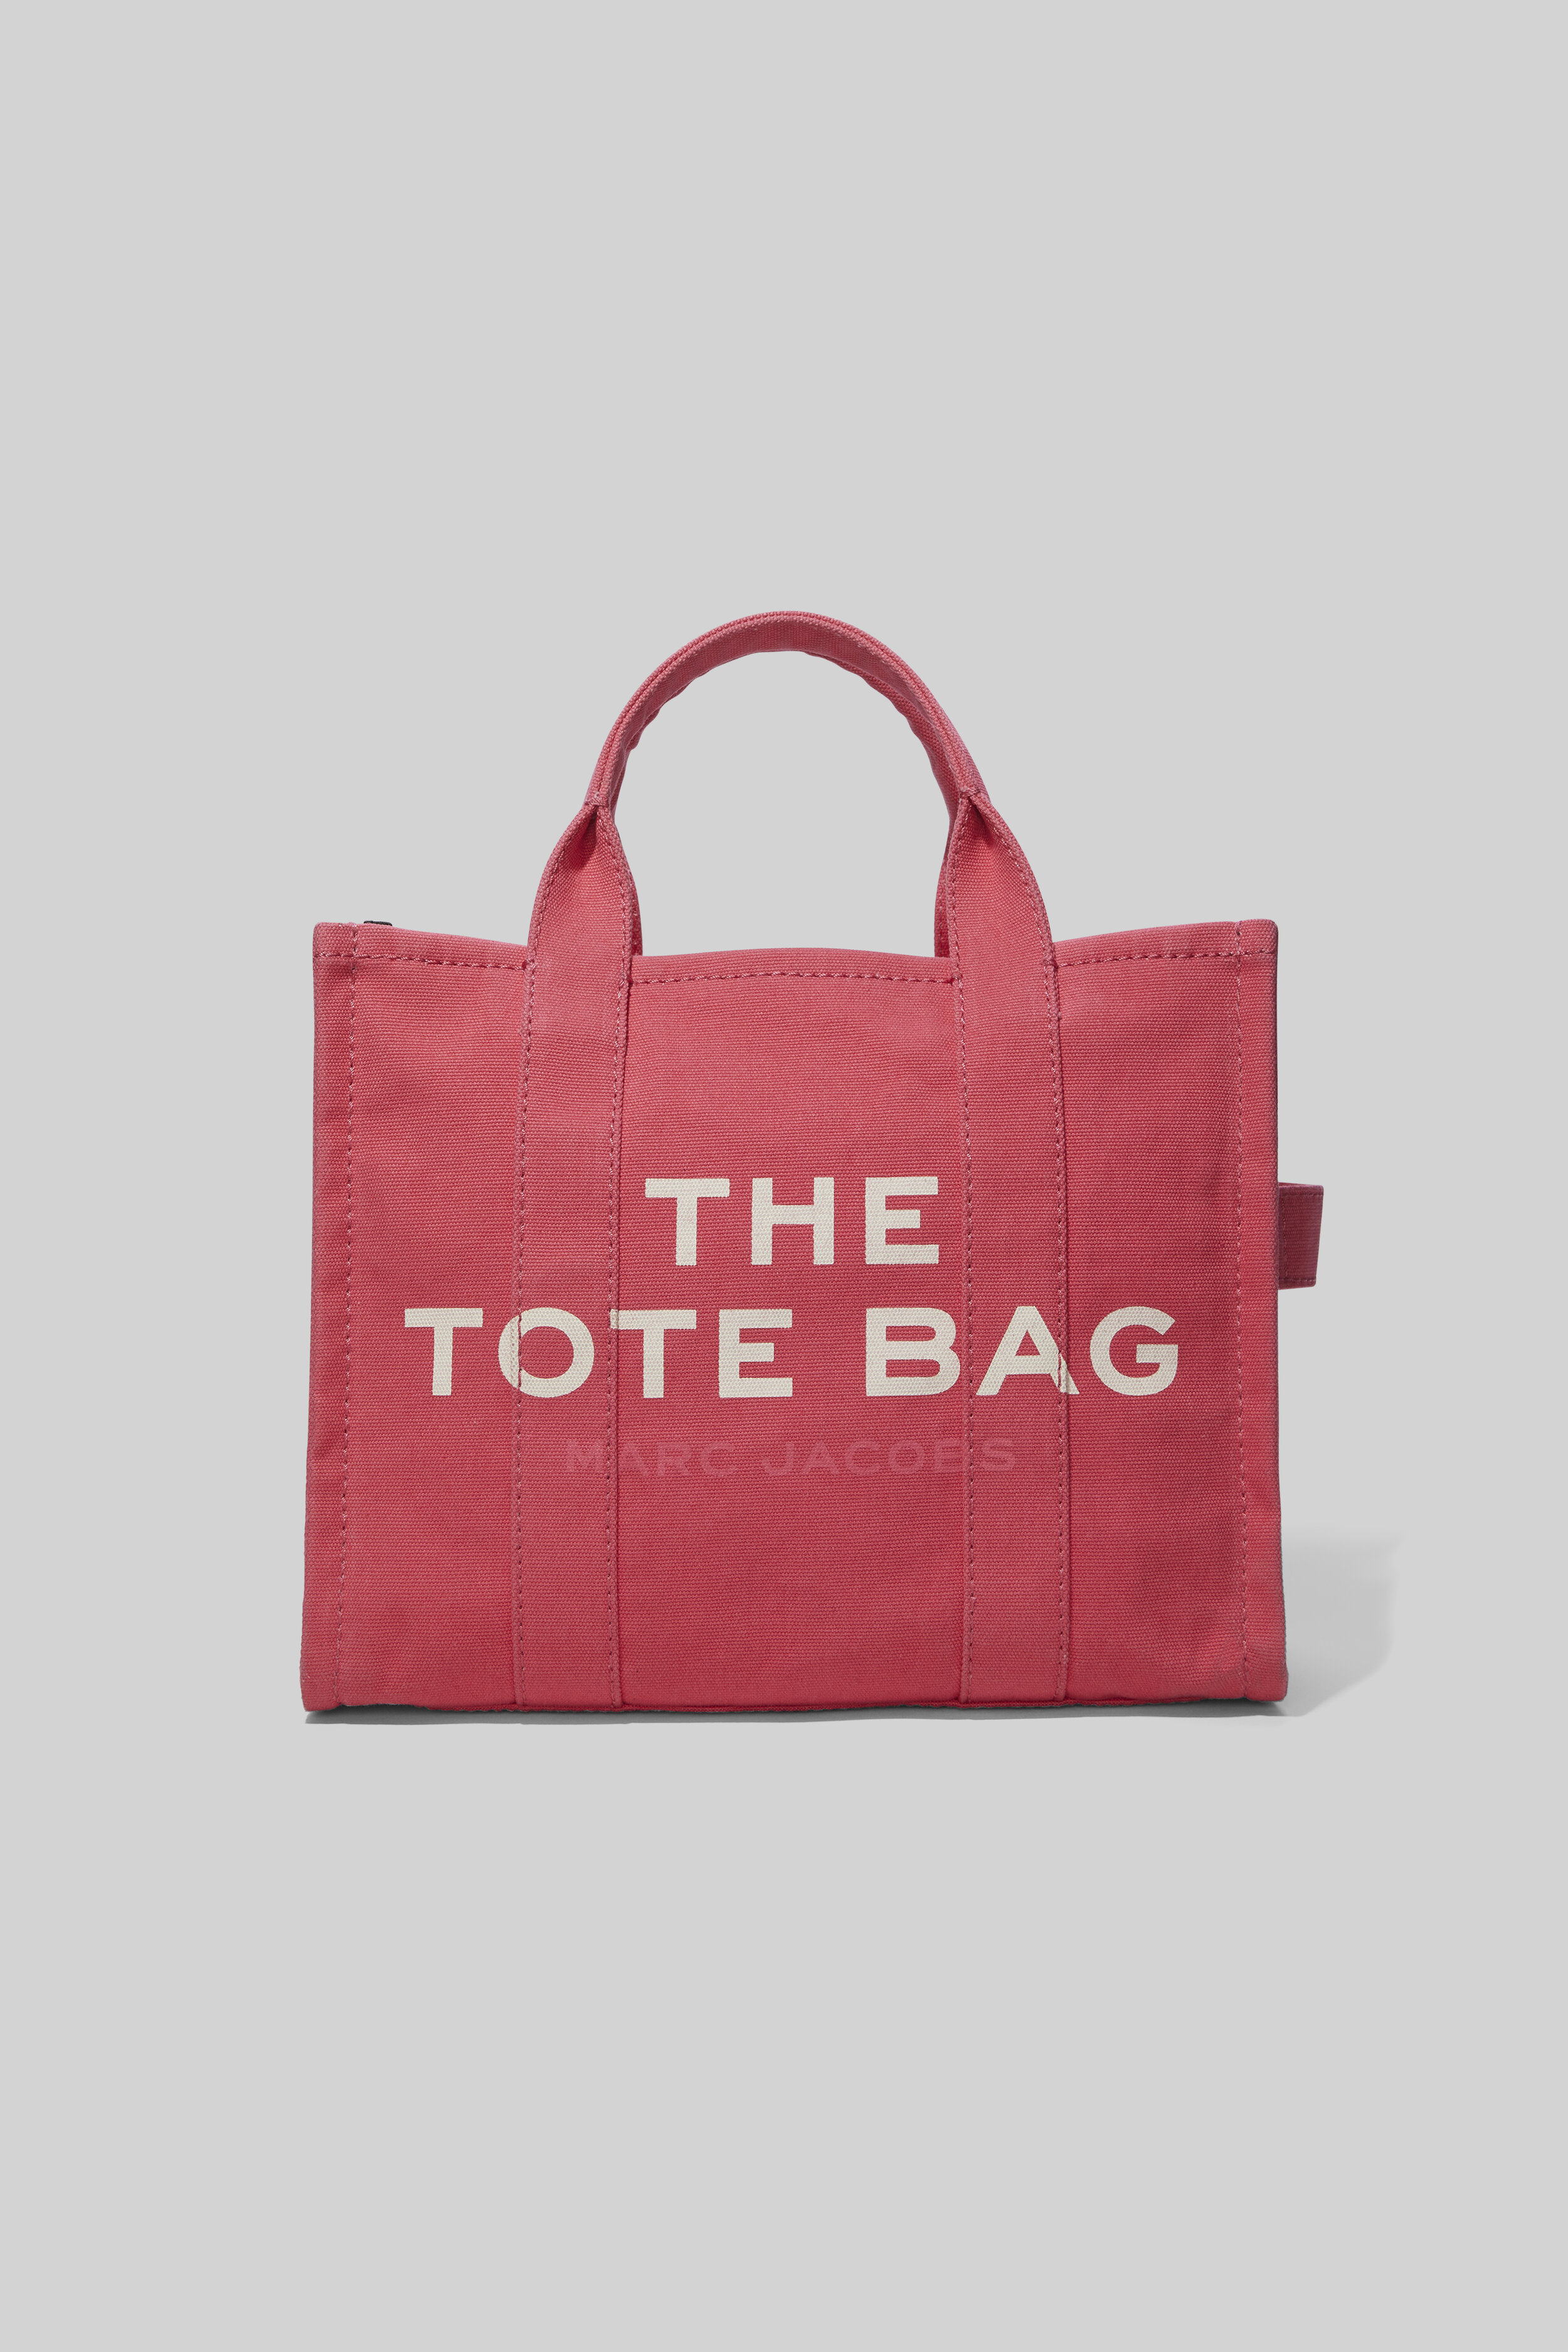 THE TOTE BAG SMALL TRAVELER TOTE ¥29,000